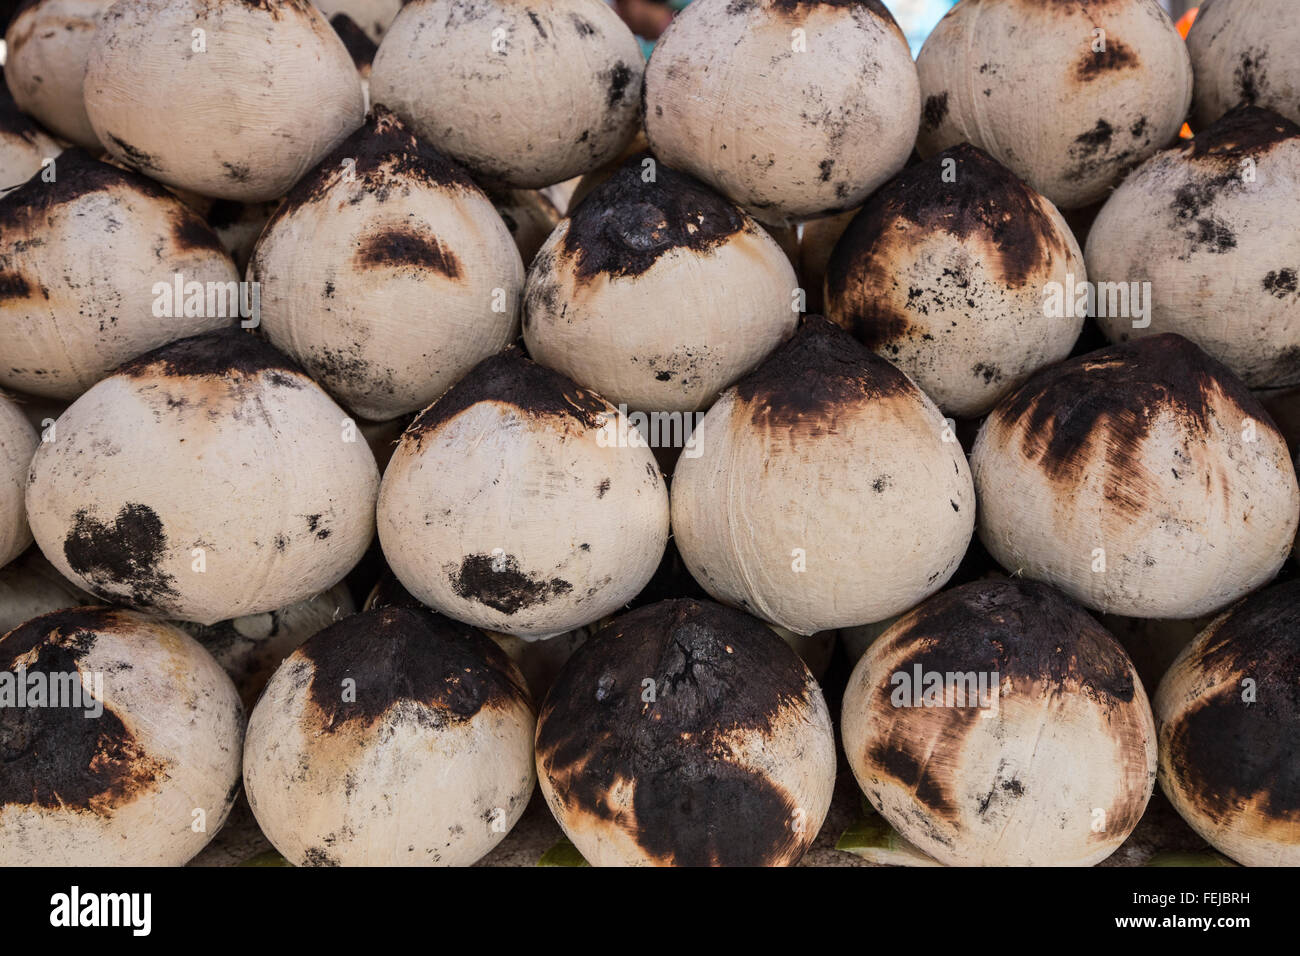 Fresh Coconut Juice and Shells at Chatuchak Market, Bangkok - The coconut palm or cocos nucifera is a tree of the palm family an Stock Photo